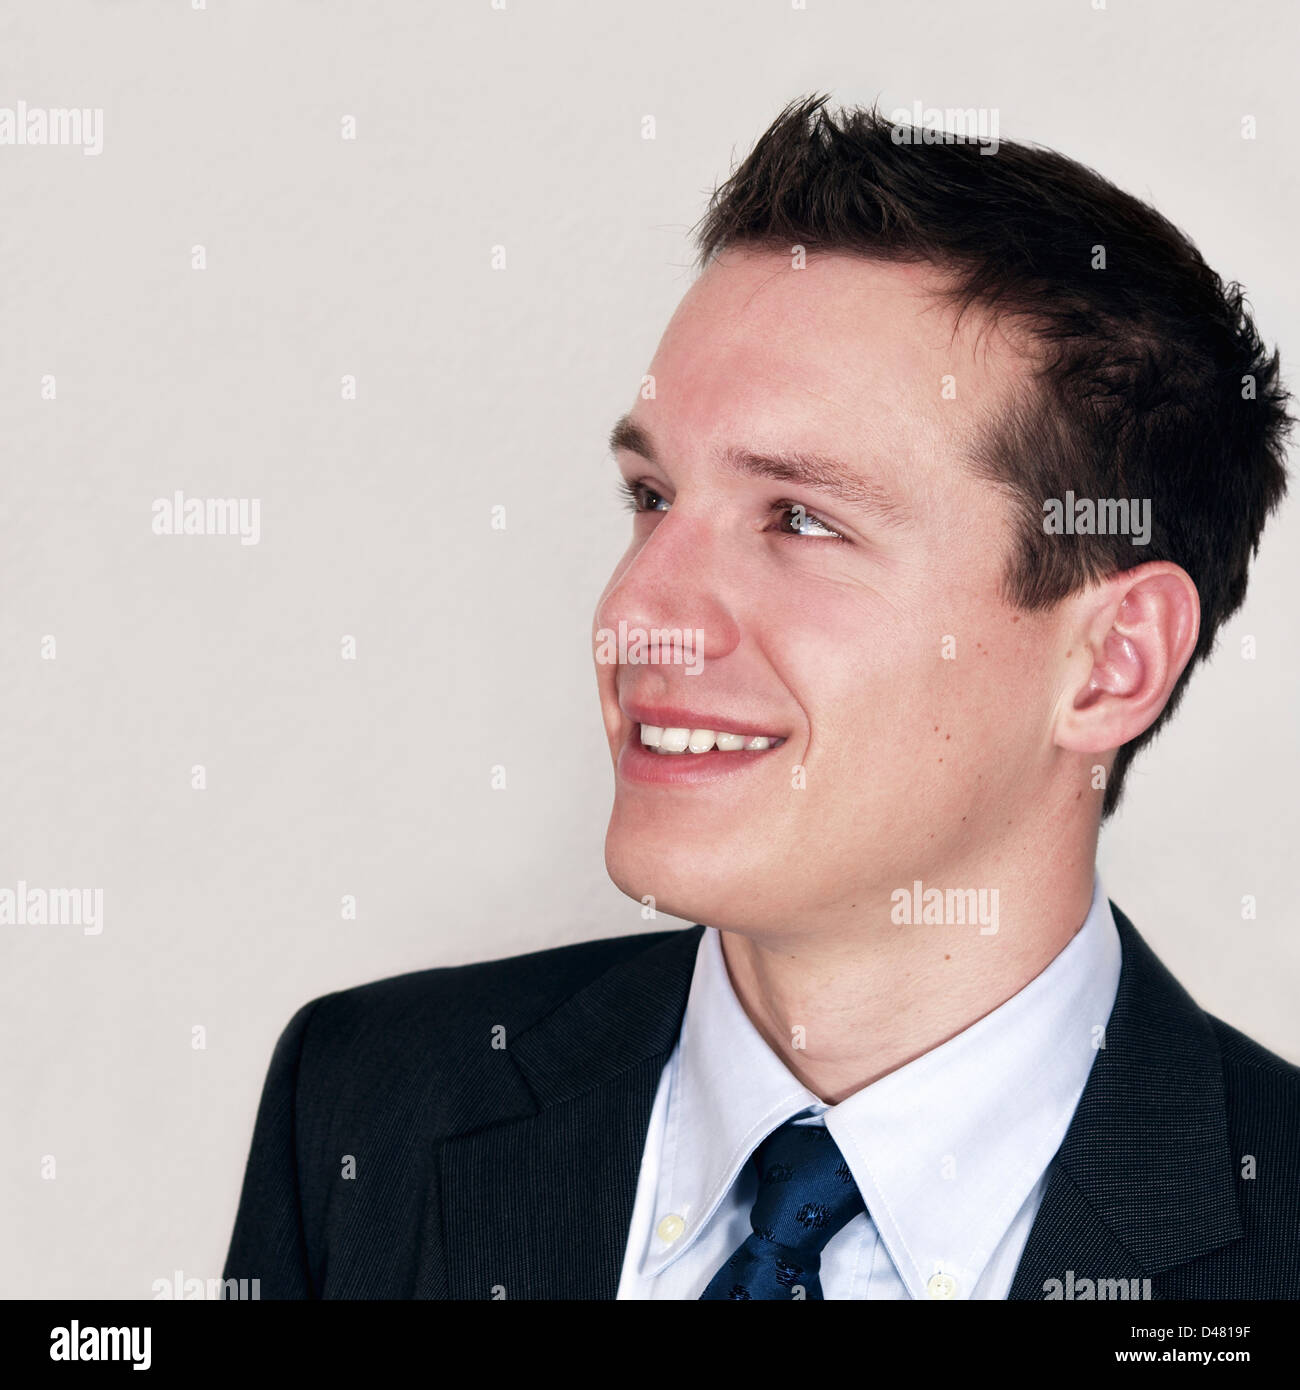 Portrait of smiling young businessman in suit Stock Photo